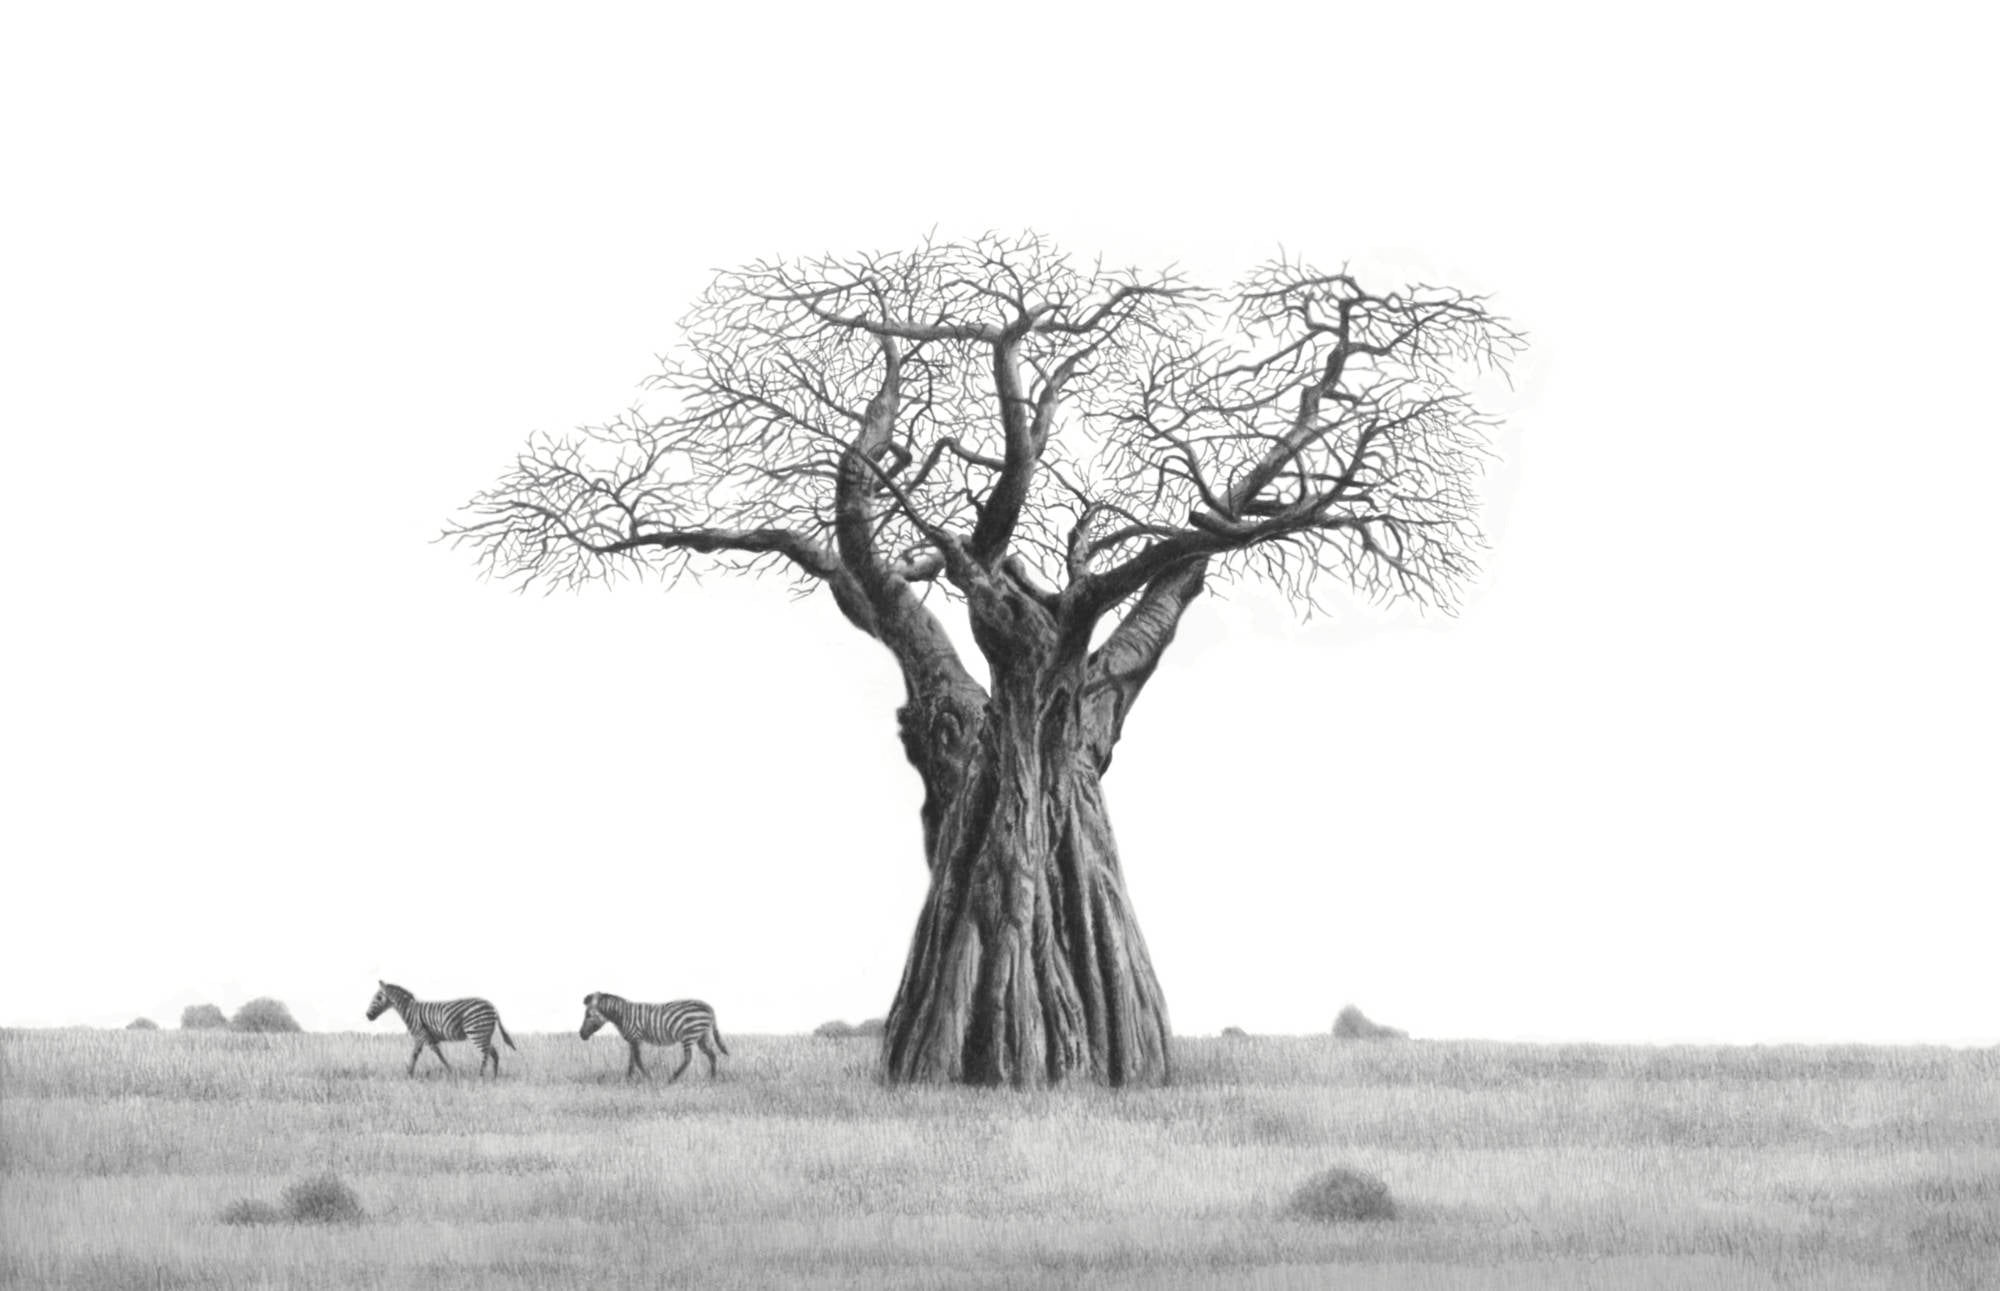 African Baobab Tree and Zebras graphite pencil artwork by Matthew Bell